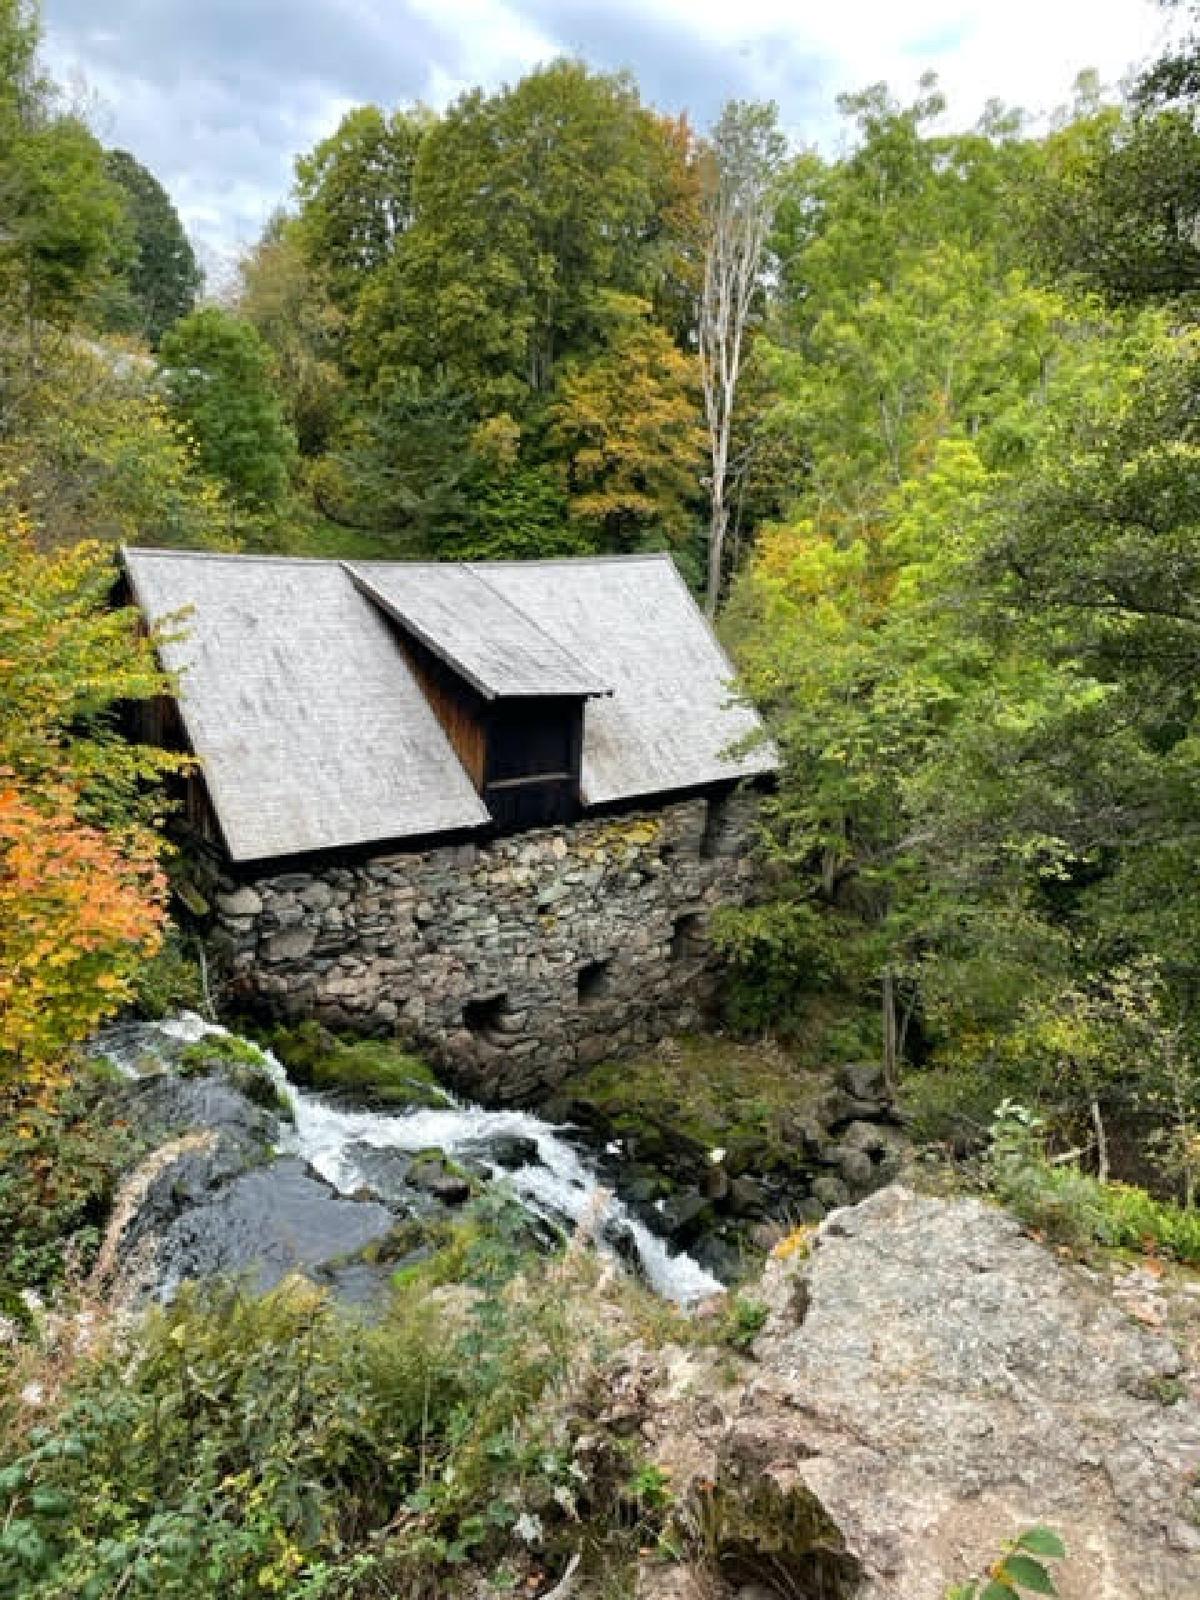 For 800 years, flour mills have employed the waterfalls of Rottle near Granna, Sweden. (Photo courtesy of Lesley Frederikson)